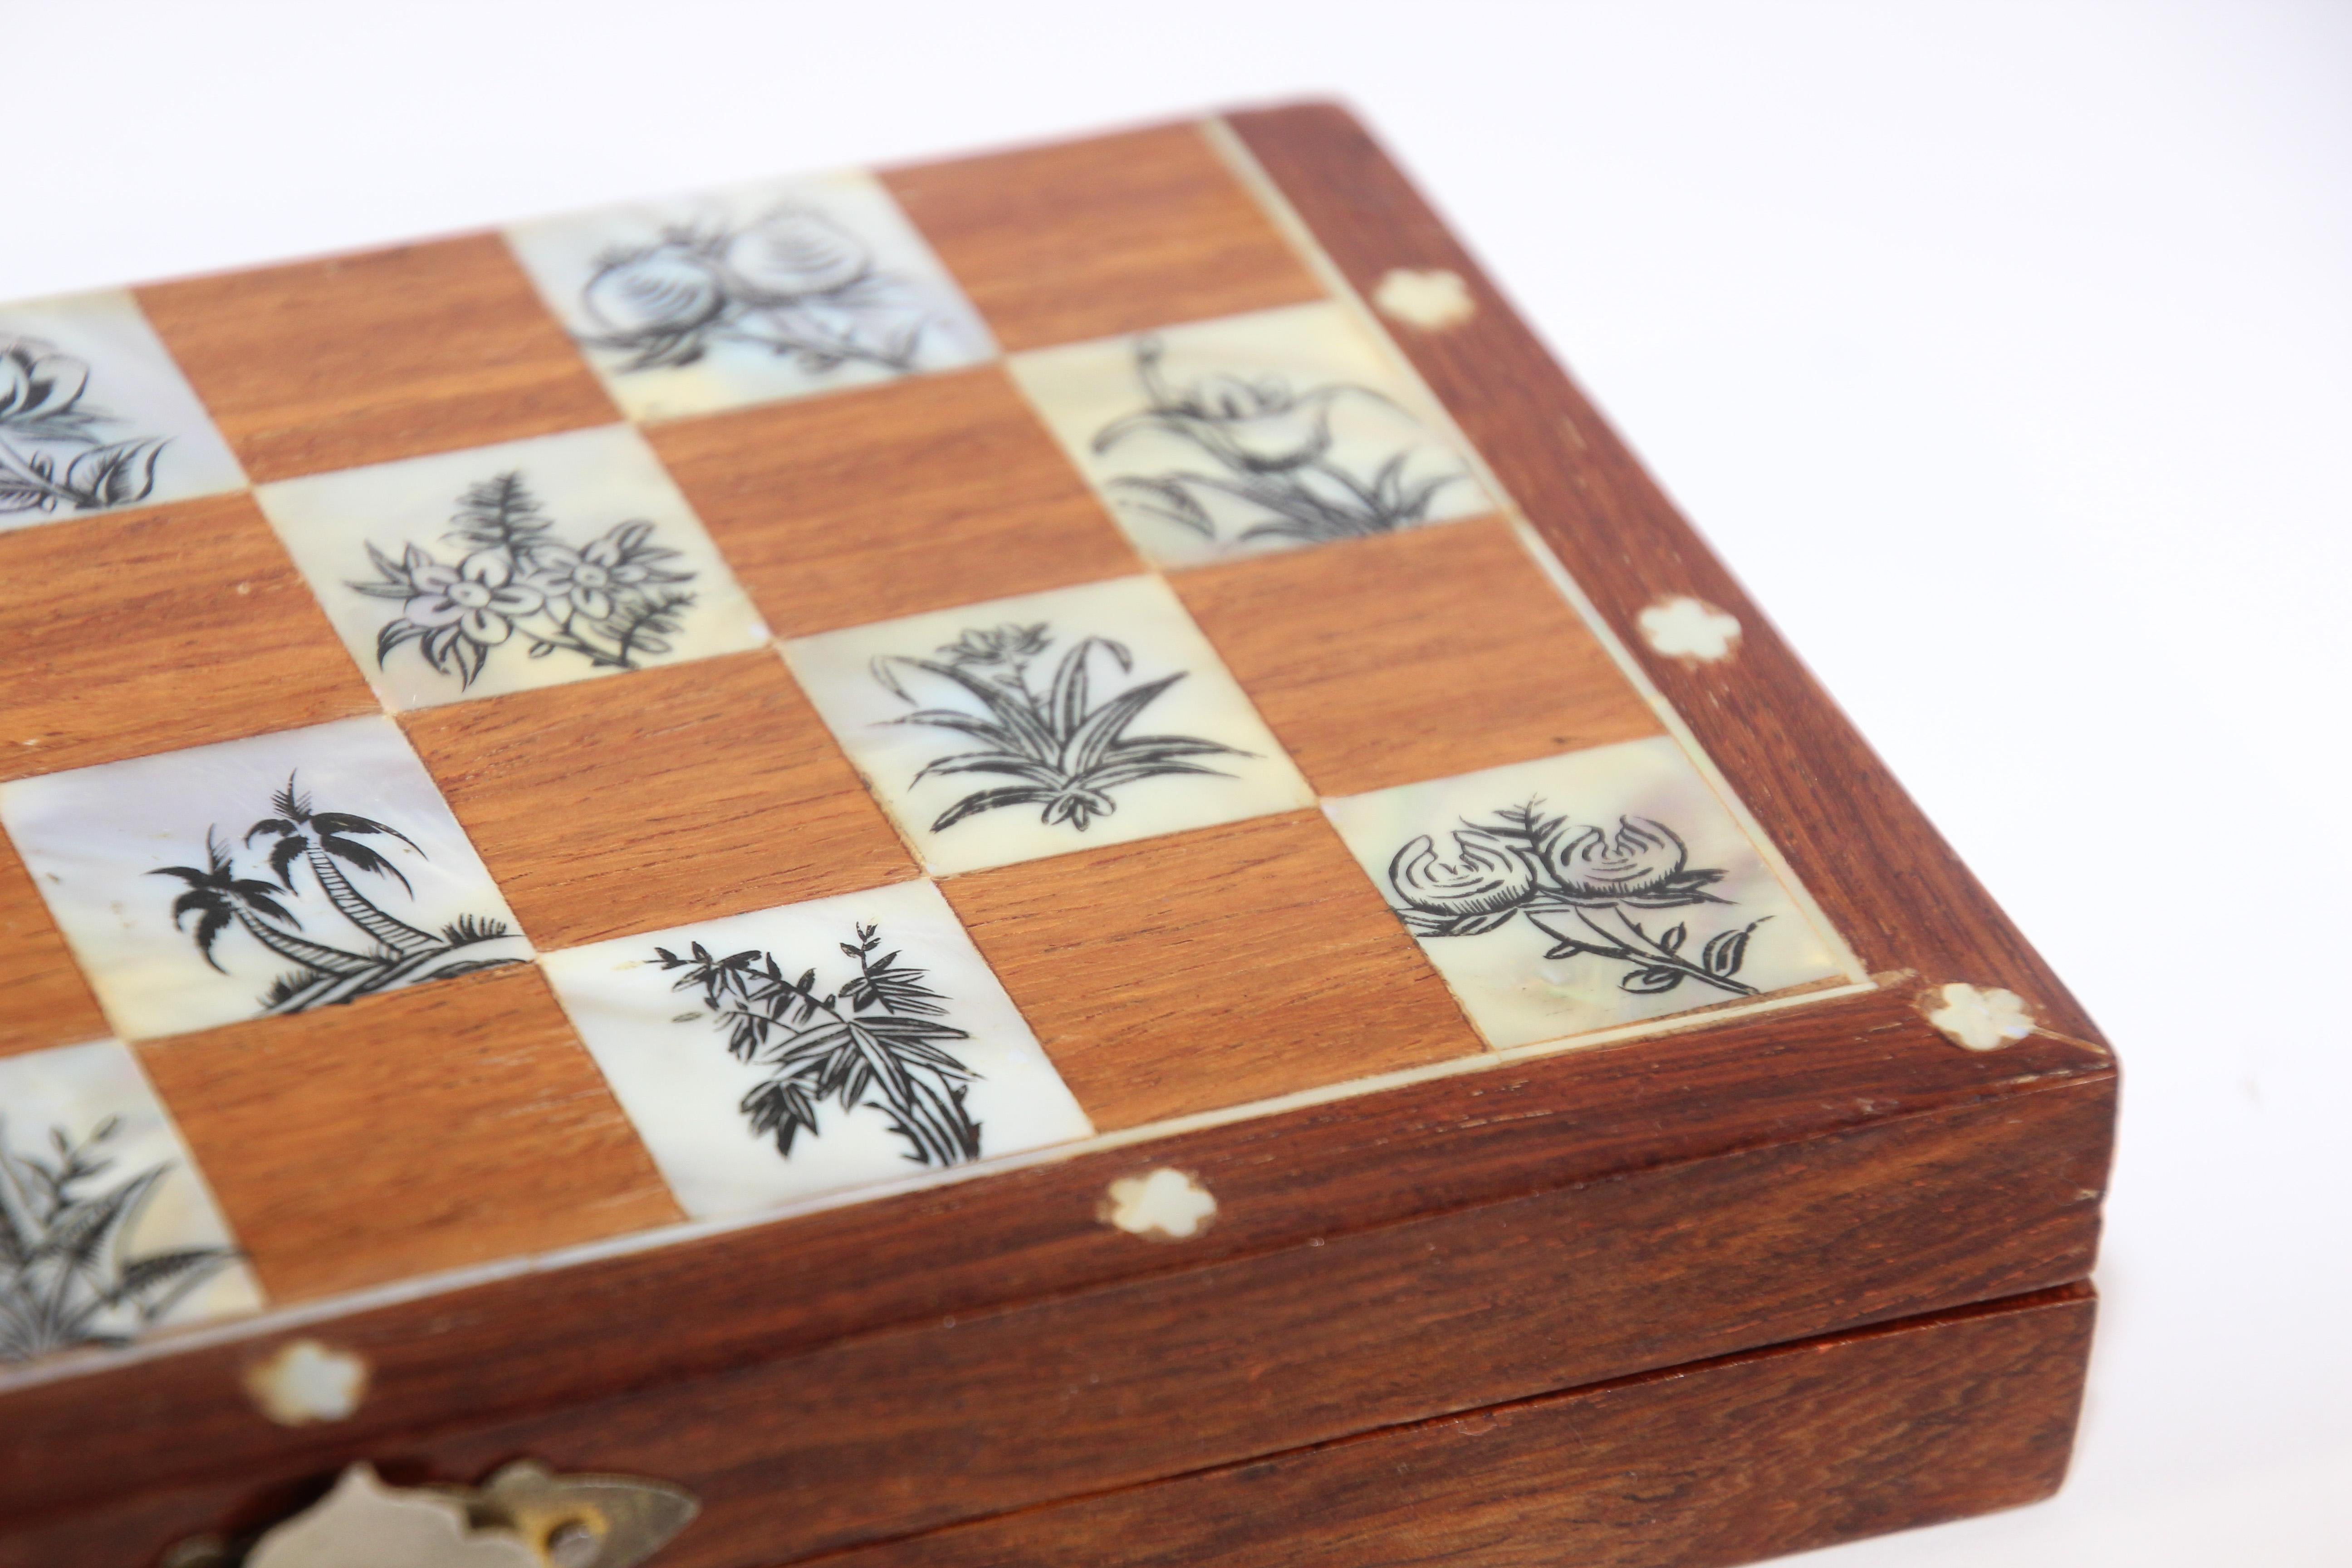 Middle Eastern Moorish Inlaid Chess Board Box For Sale 6